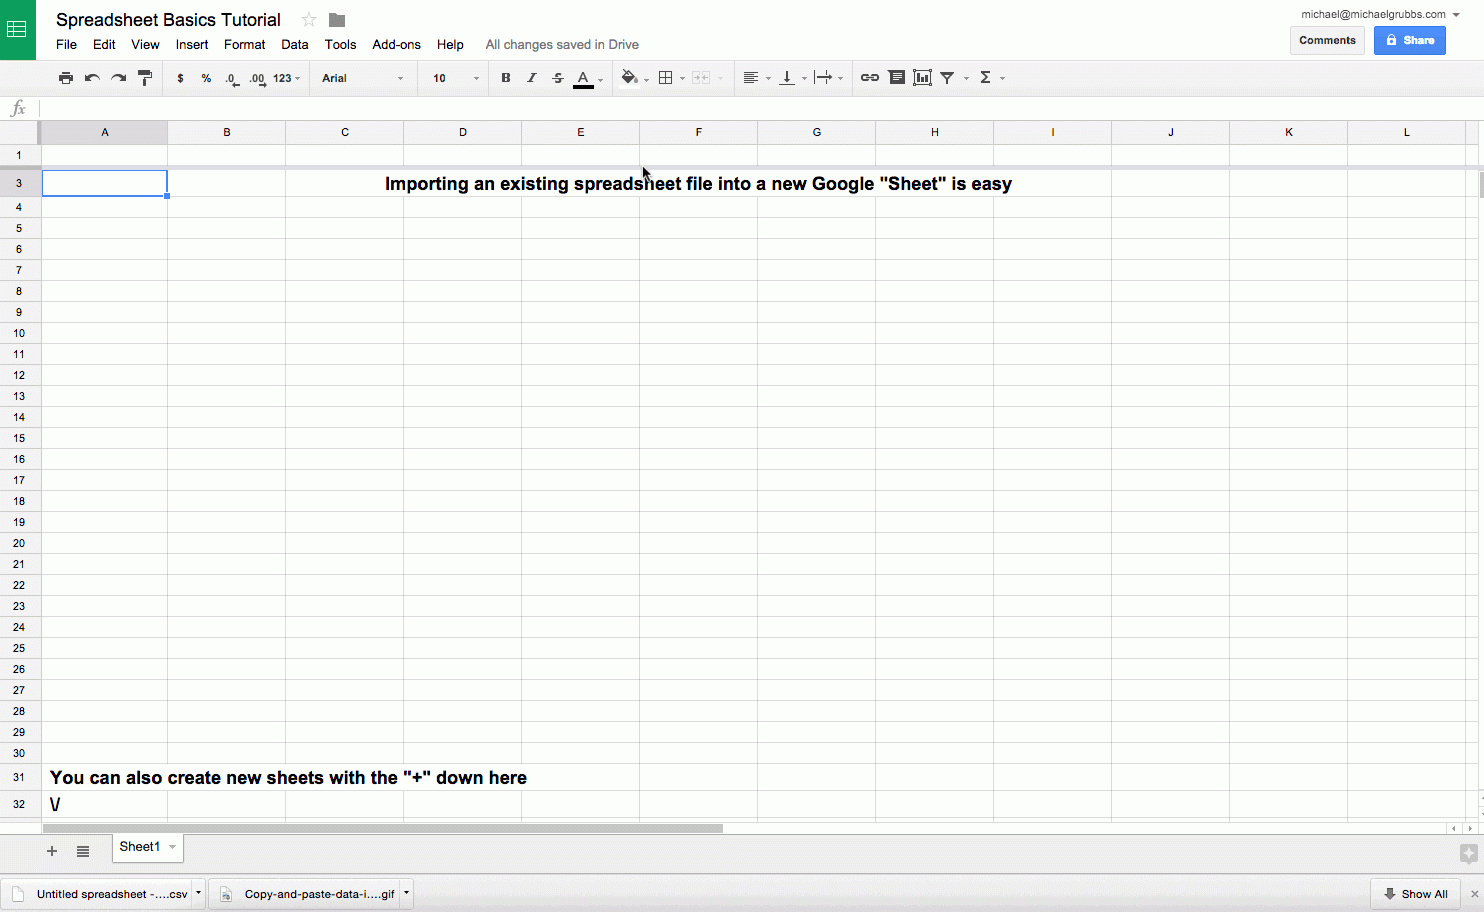 How To Create An Excel Spreadsheet Online To Share In Google Sheets 101: The Beginner's Guide To Online Spreadsheets  The